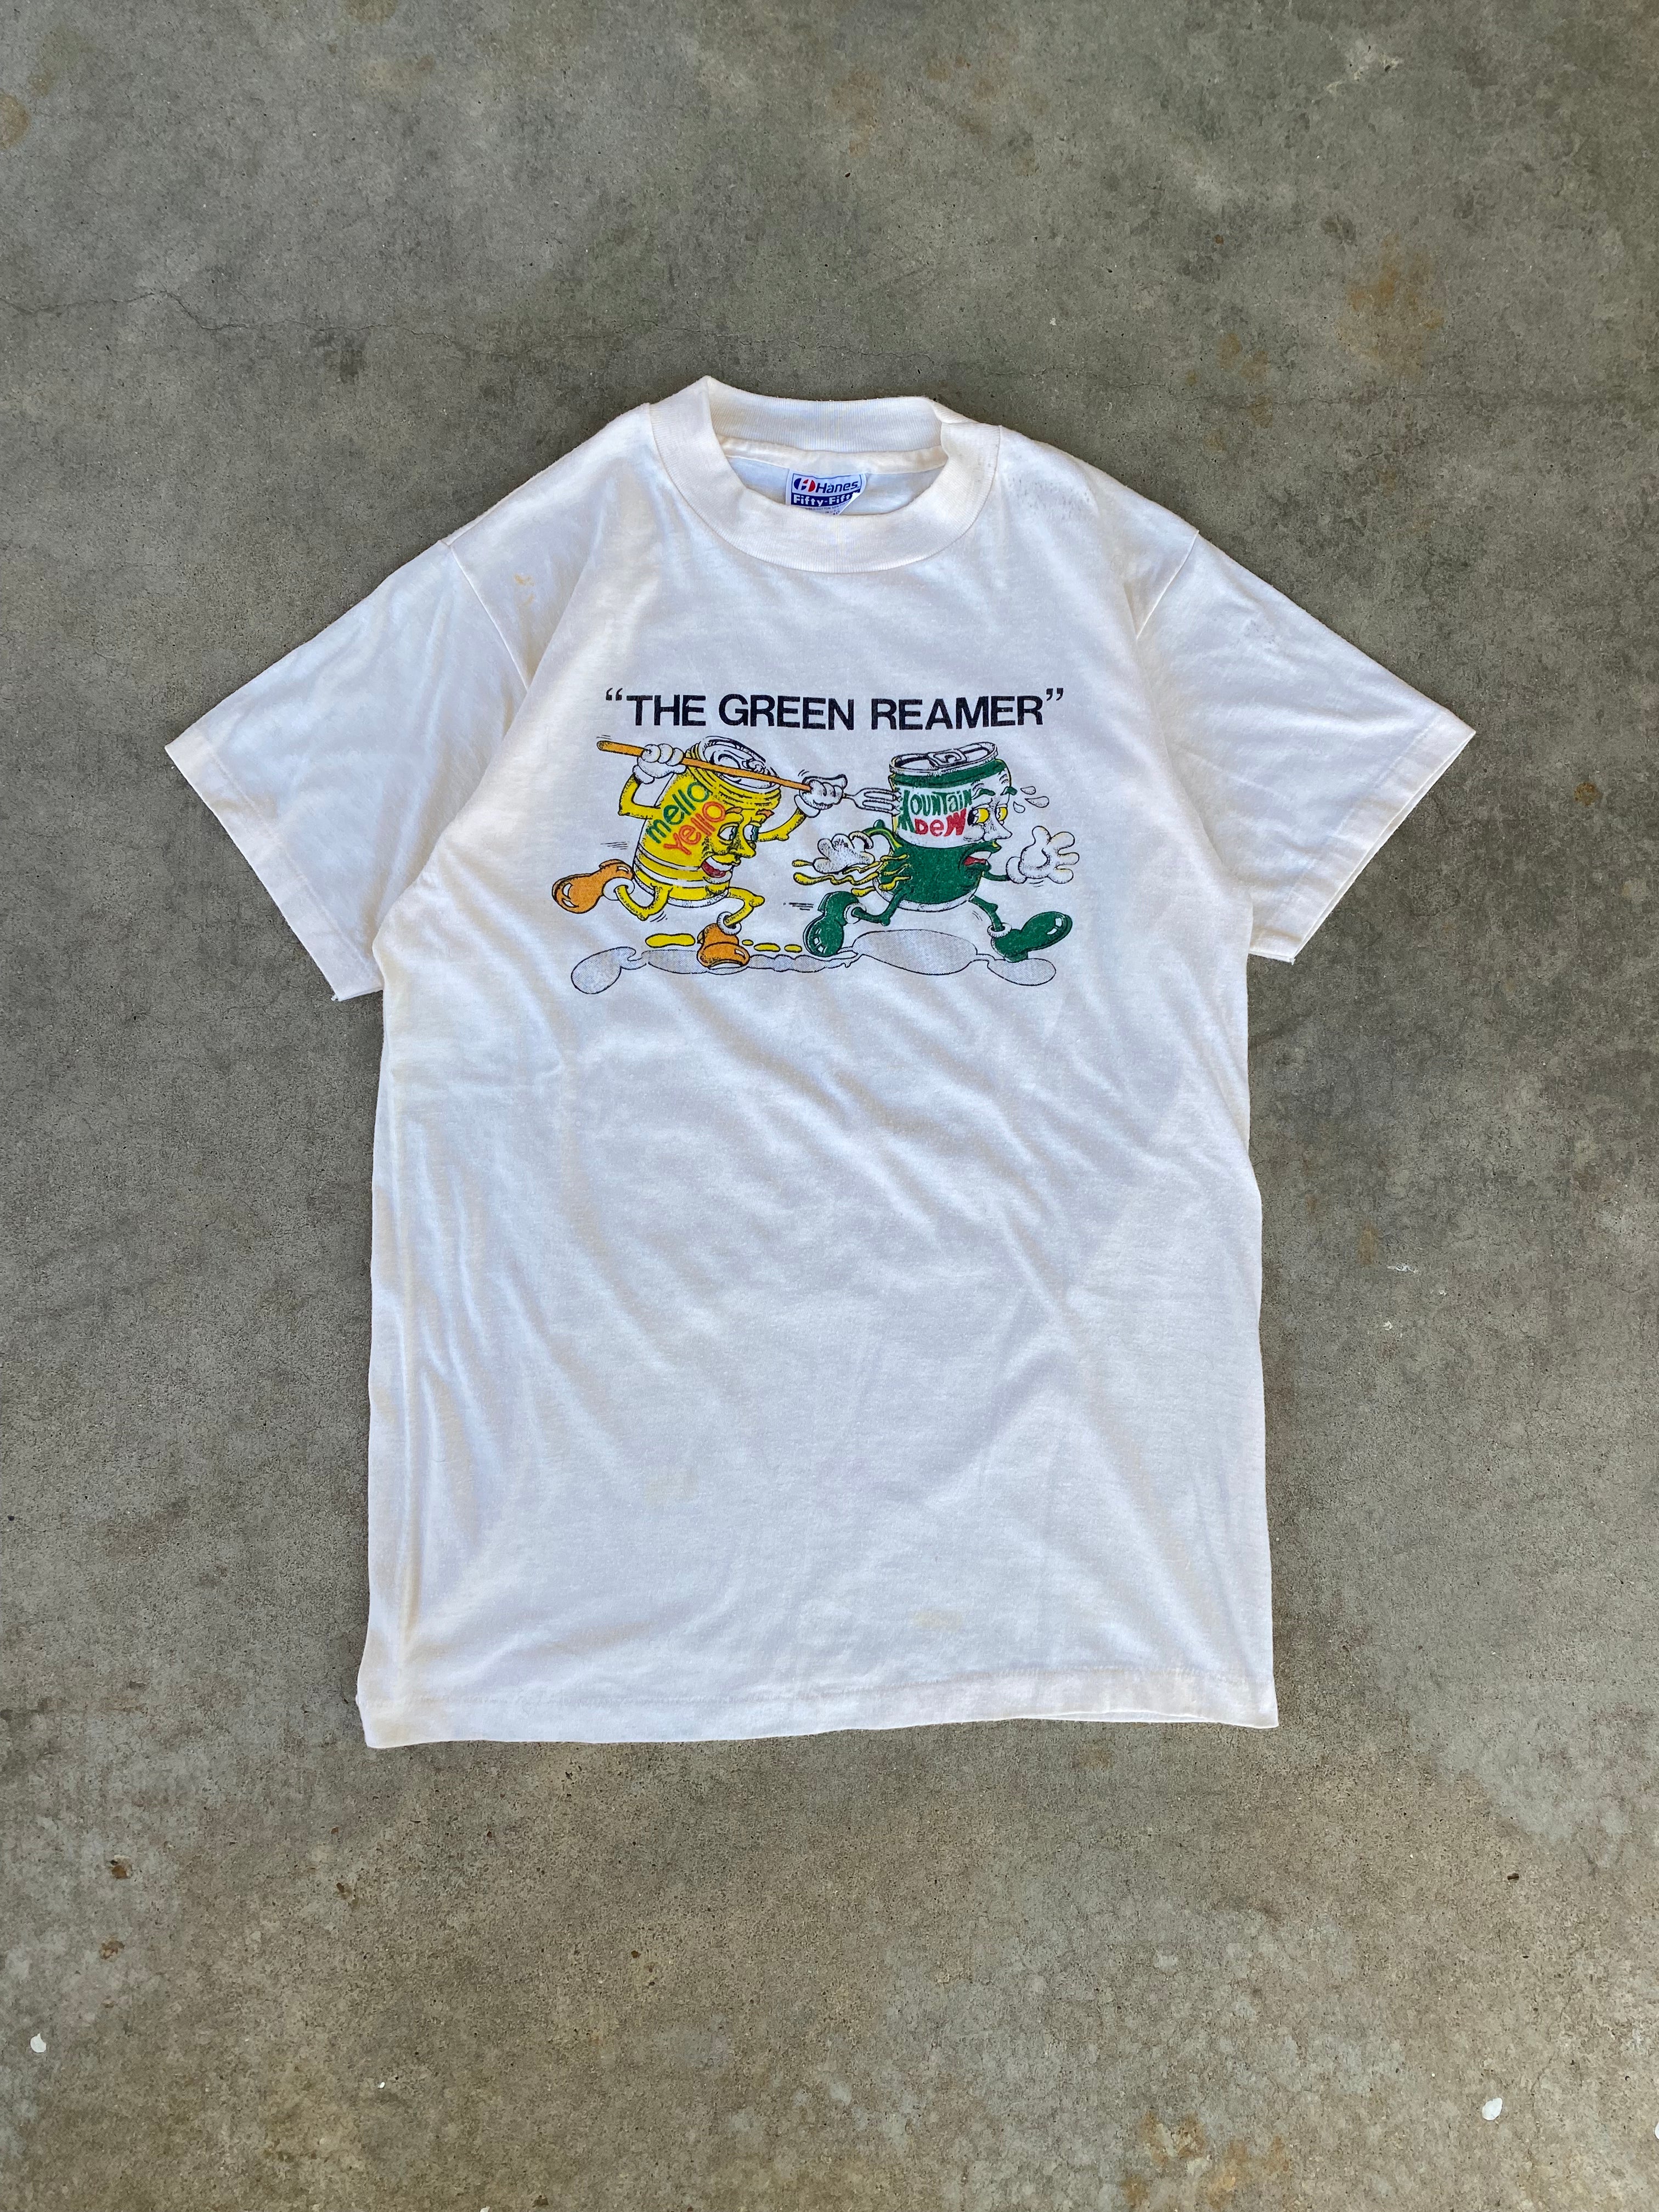 1980s “The Gream Reamer” T-Shirt (S)